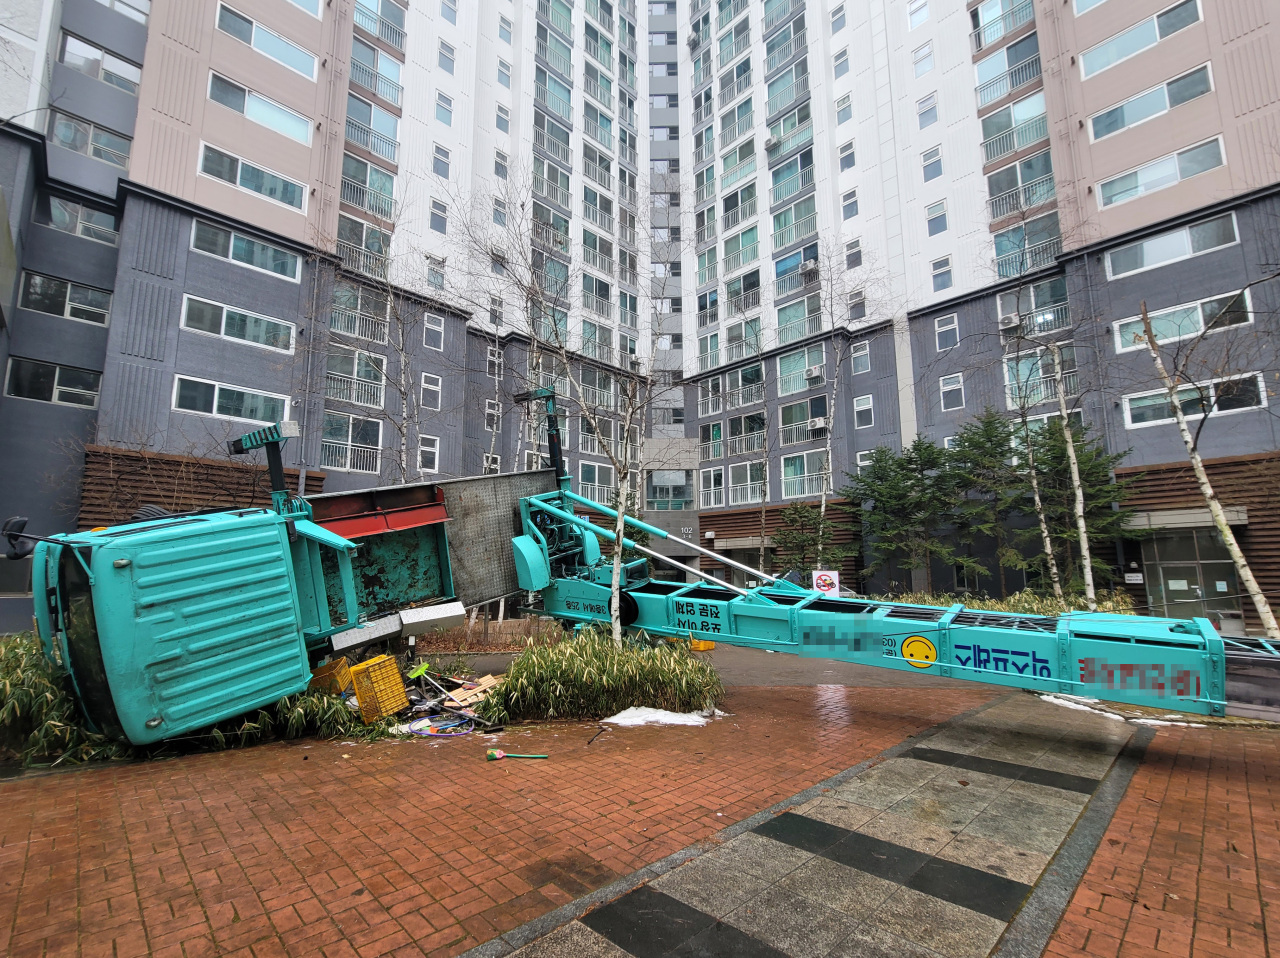 A ladder truck that has rolled over while loading household items to the 22nd floor of an apartment complex in Chuncheon, Gangwon Province, Jan. 25. (Yonhap)